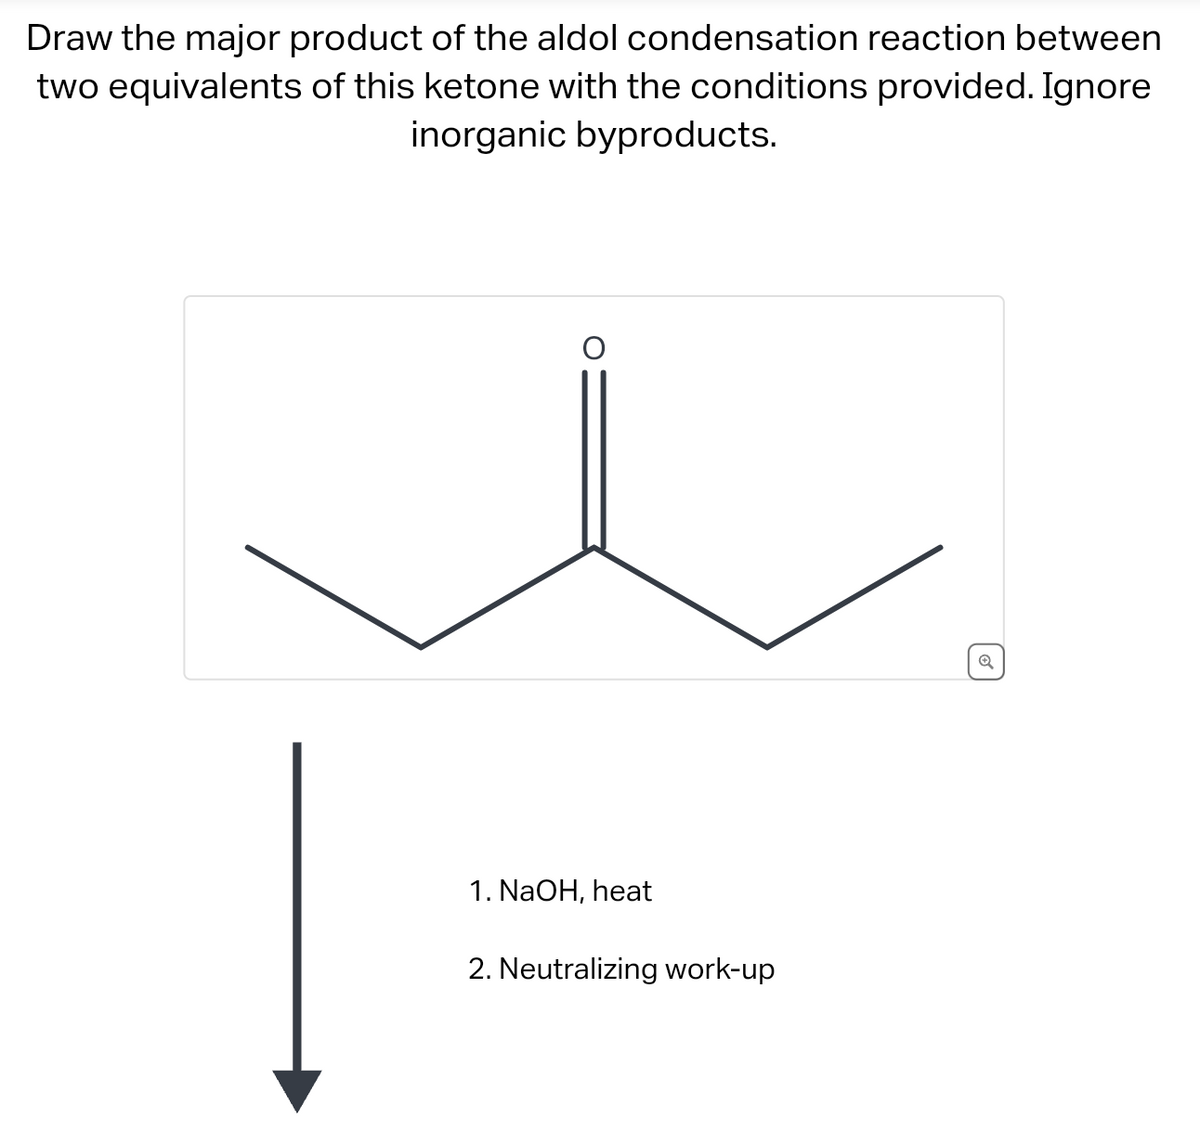 Draw the major product of the aldol condensation reaction between
two equivalents of this ketone with the conditions provided. Ignore
inorganic byproducts.
1. NaOH, heat
2. Neutralizing work-up
Q